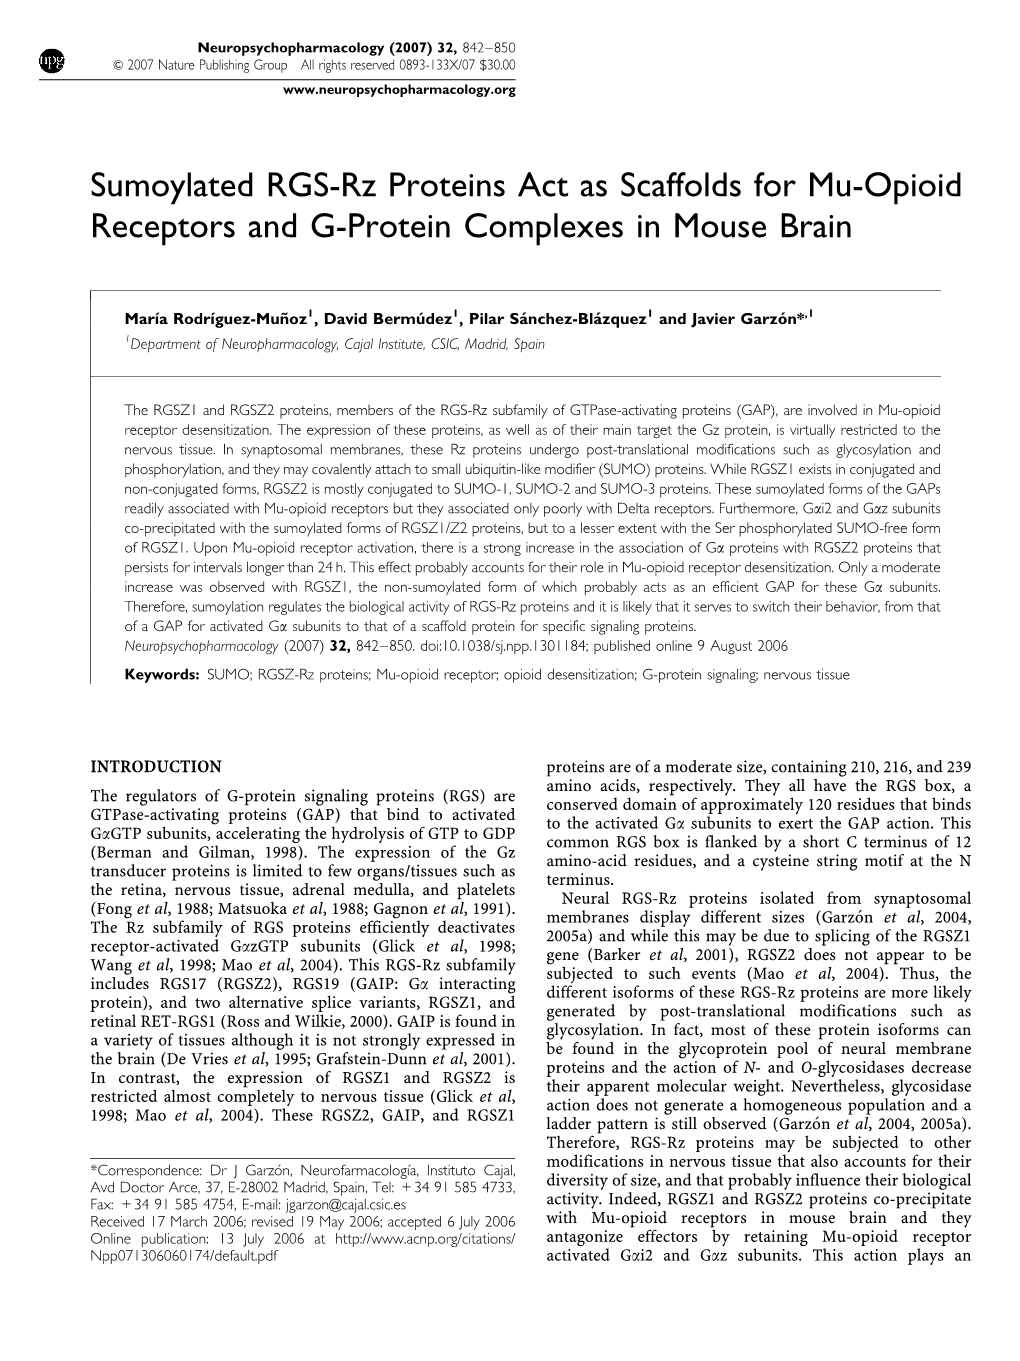 Sumoylated RGS-Rz Proteins Act As Scaffolds for Mu-Opioid Receptors and G-Protein Complexes in Mouse Brain